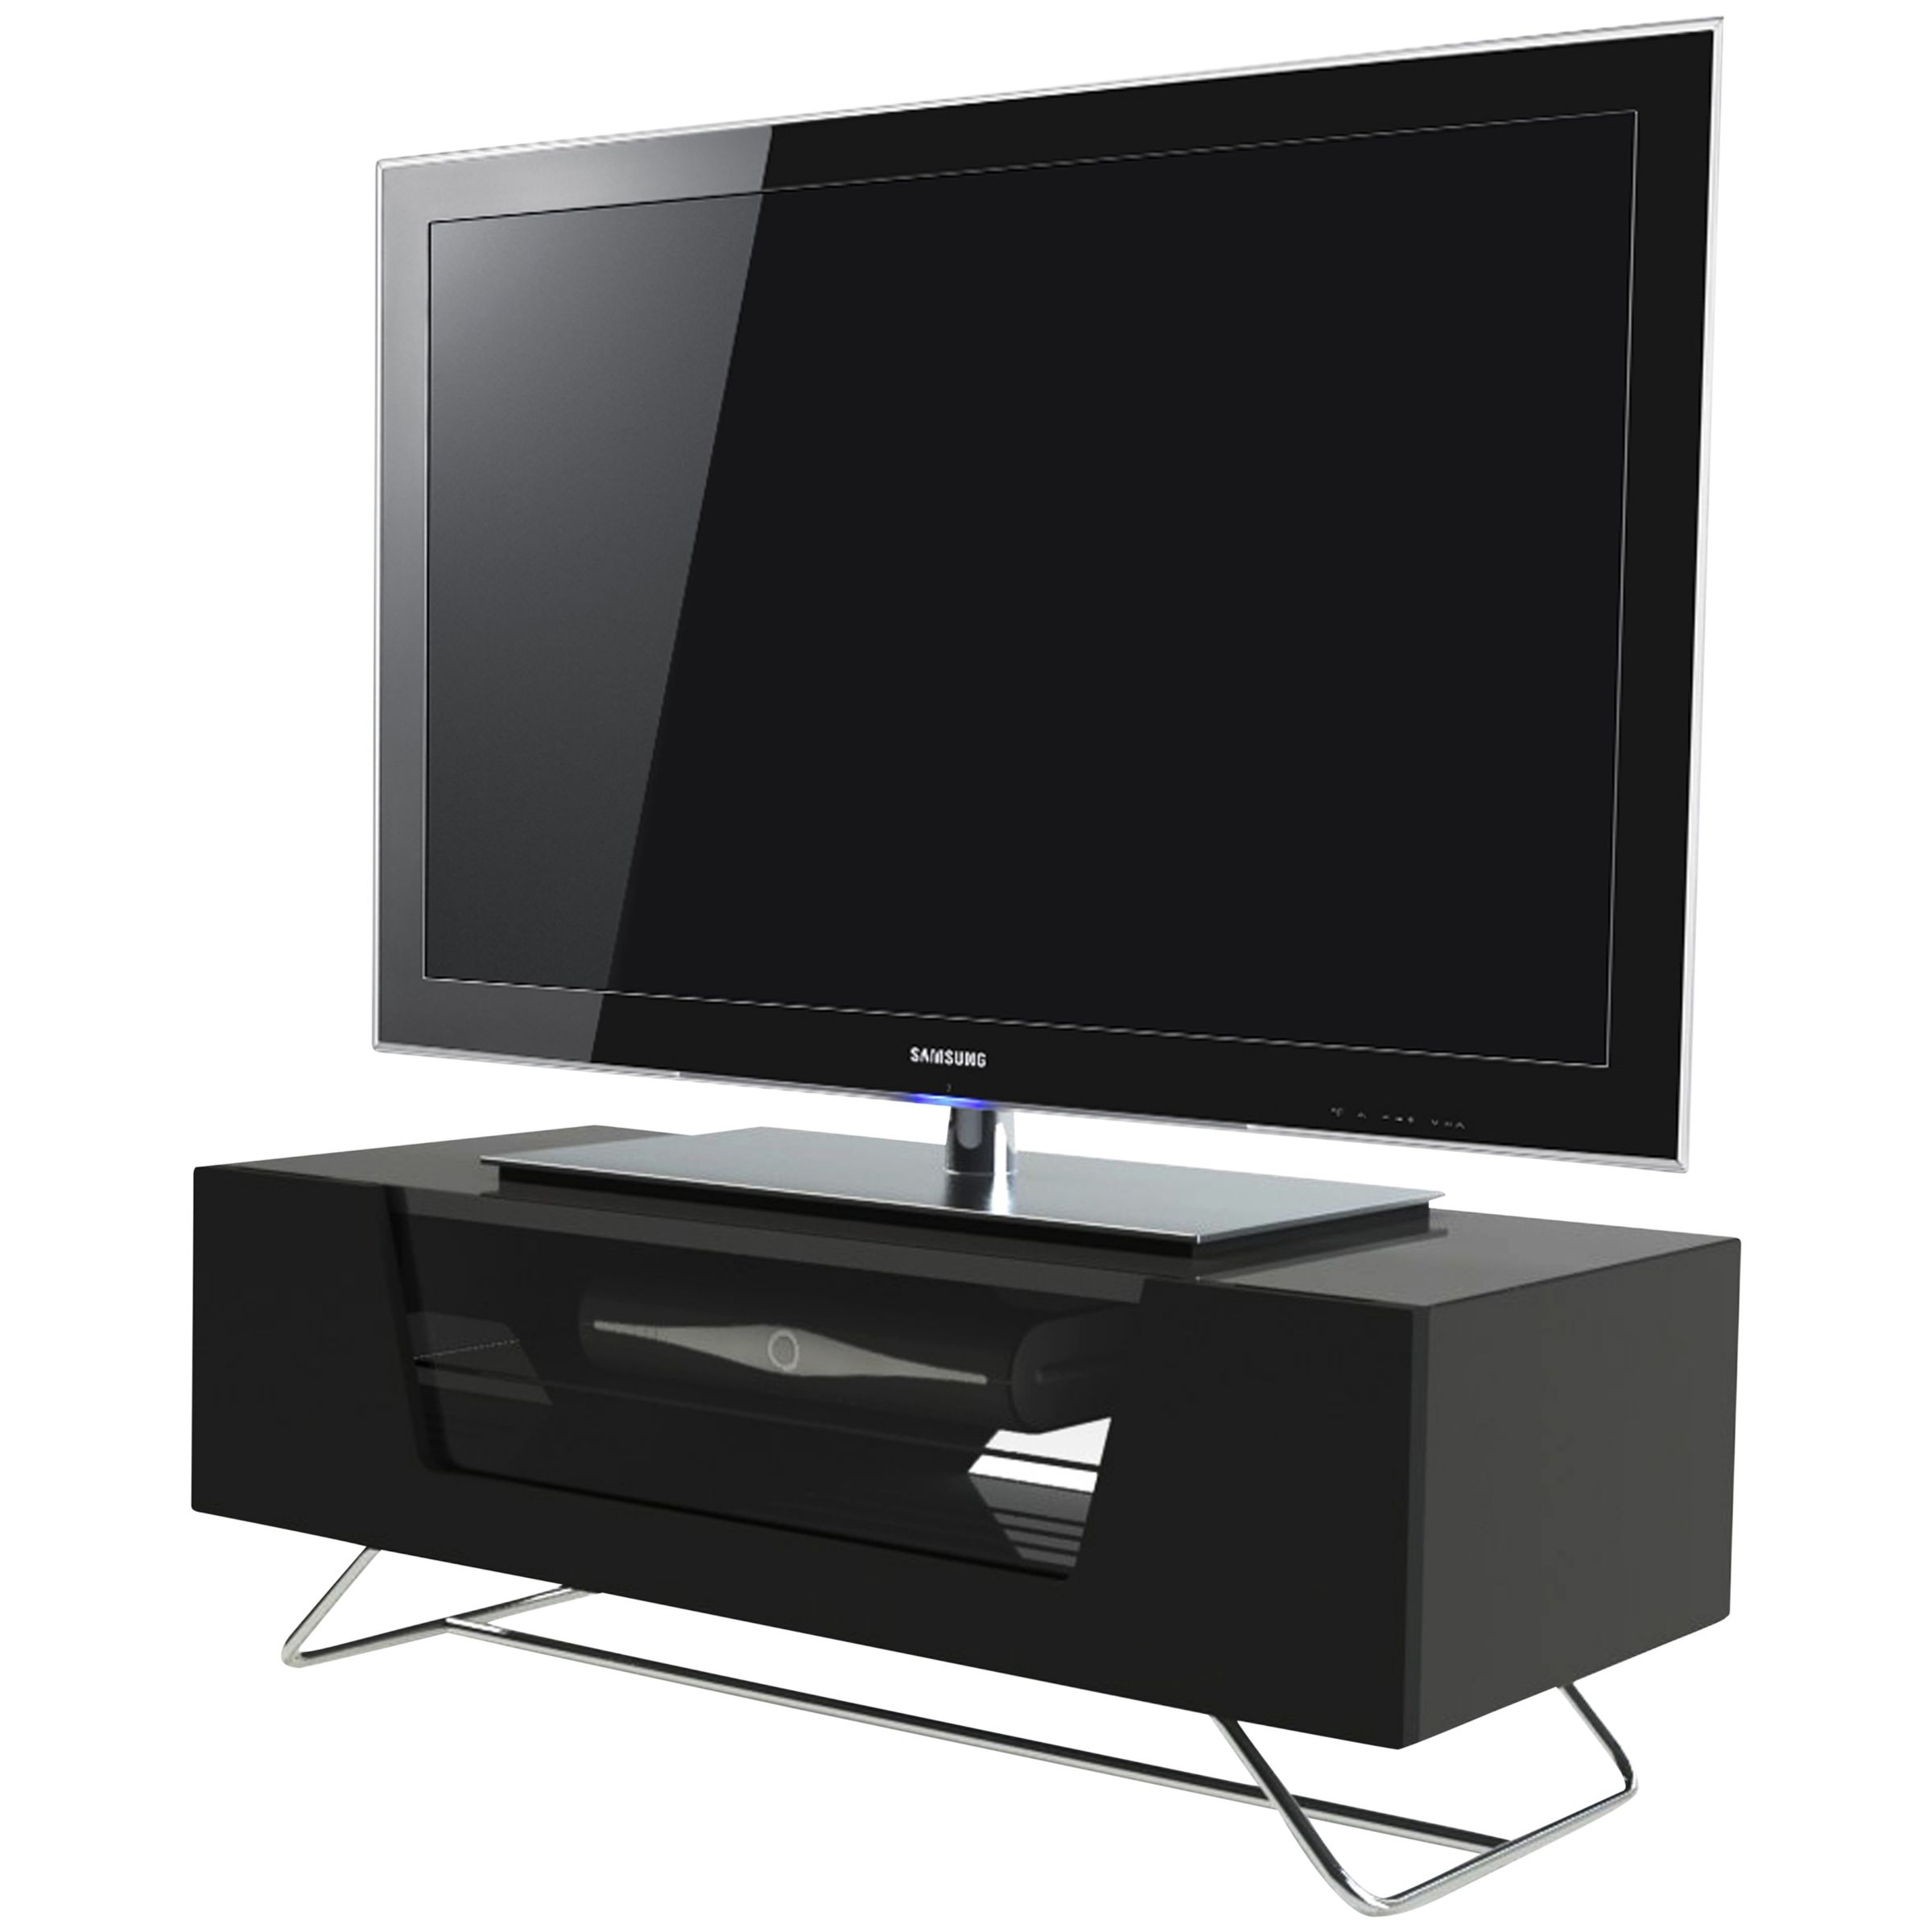 Alphason Chromium 1000 TV Stand for up to 55-inch TVs, width 100cm